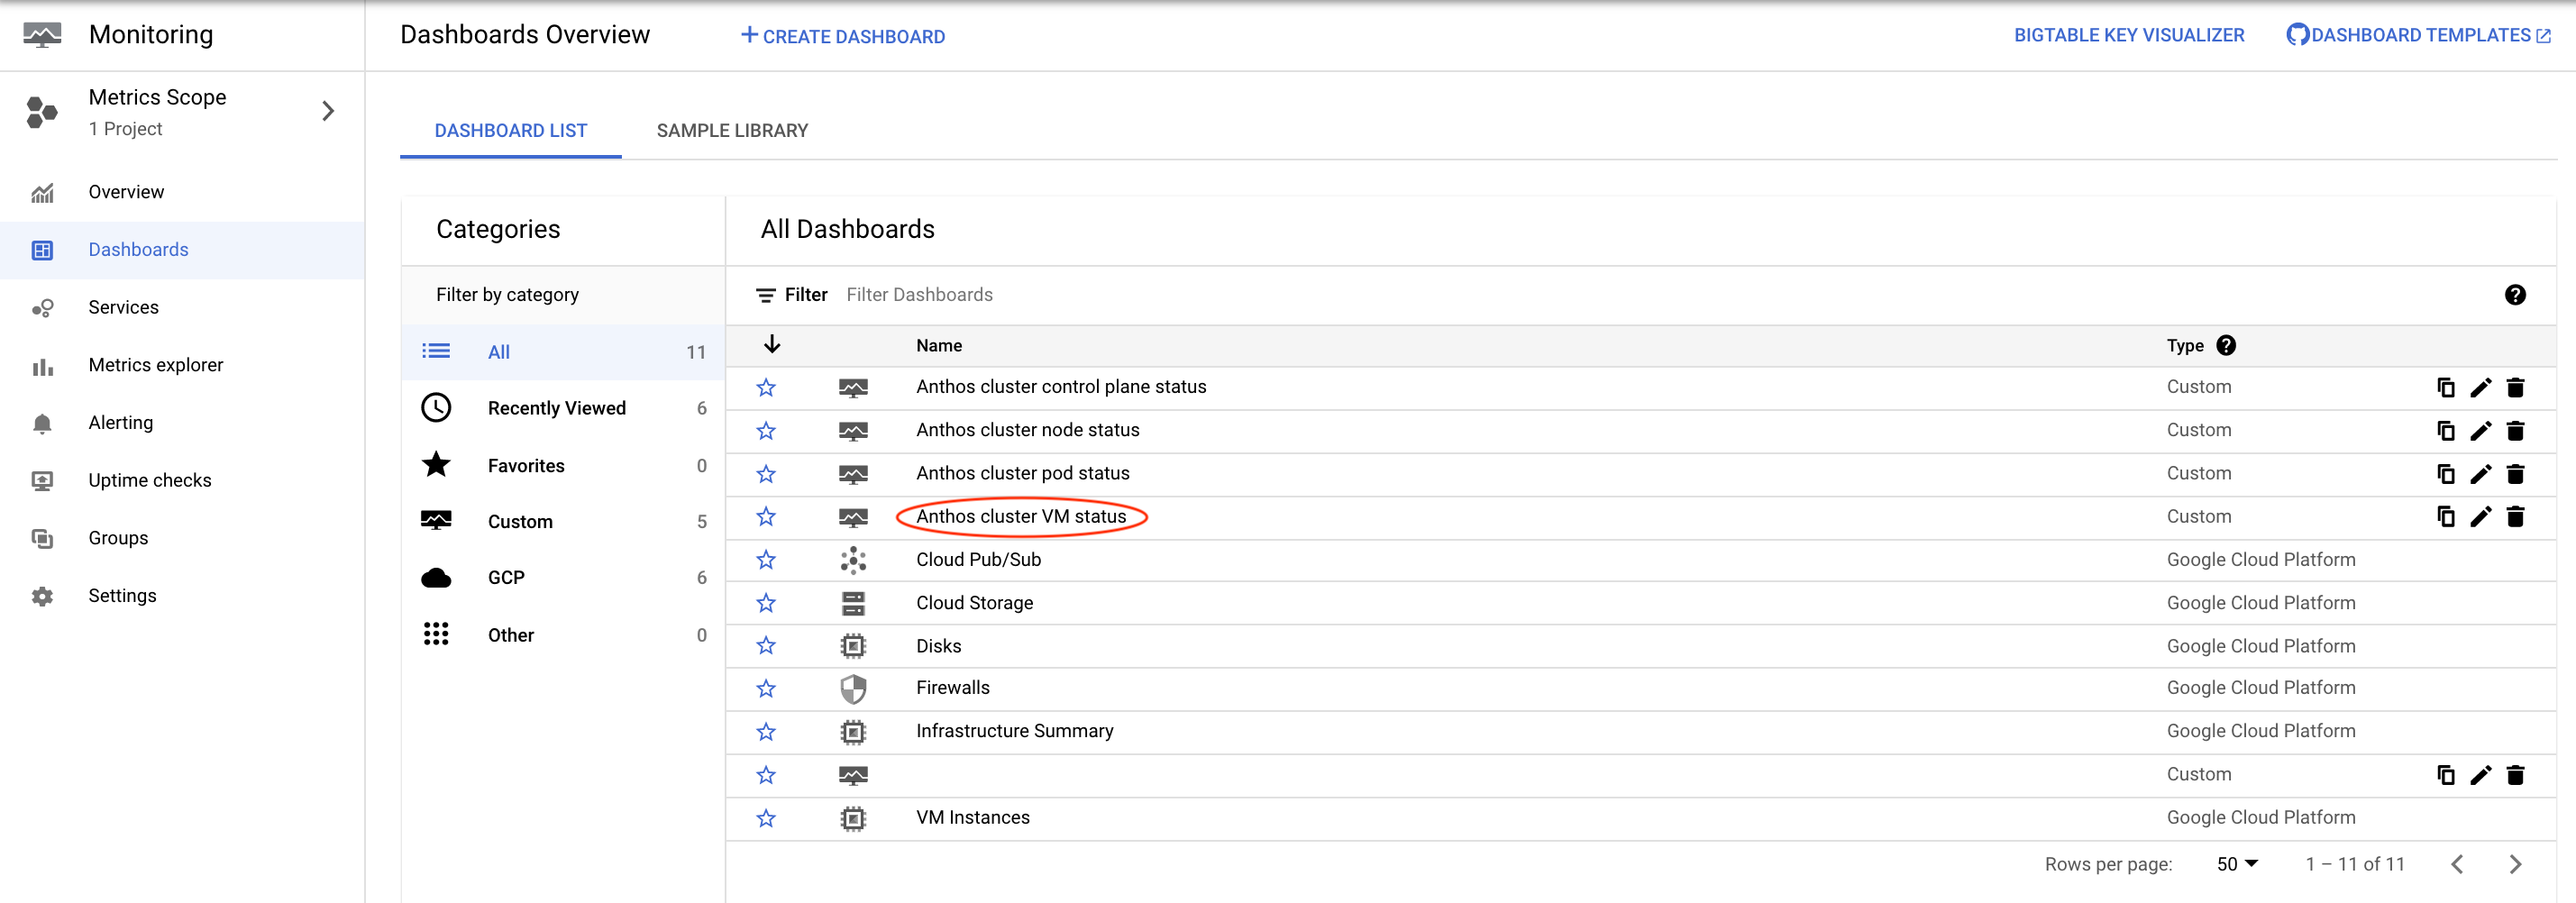 Anthos cluster VM status dashboard in the Monitoring dashboards list